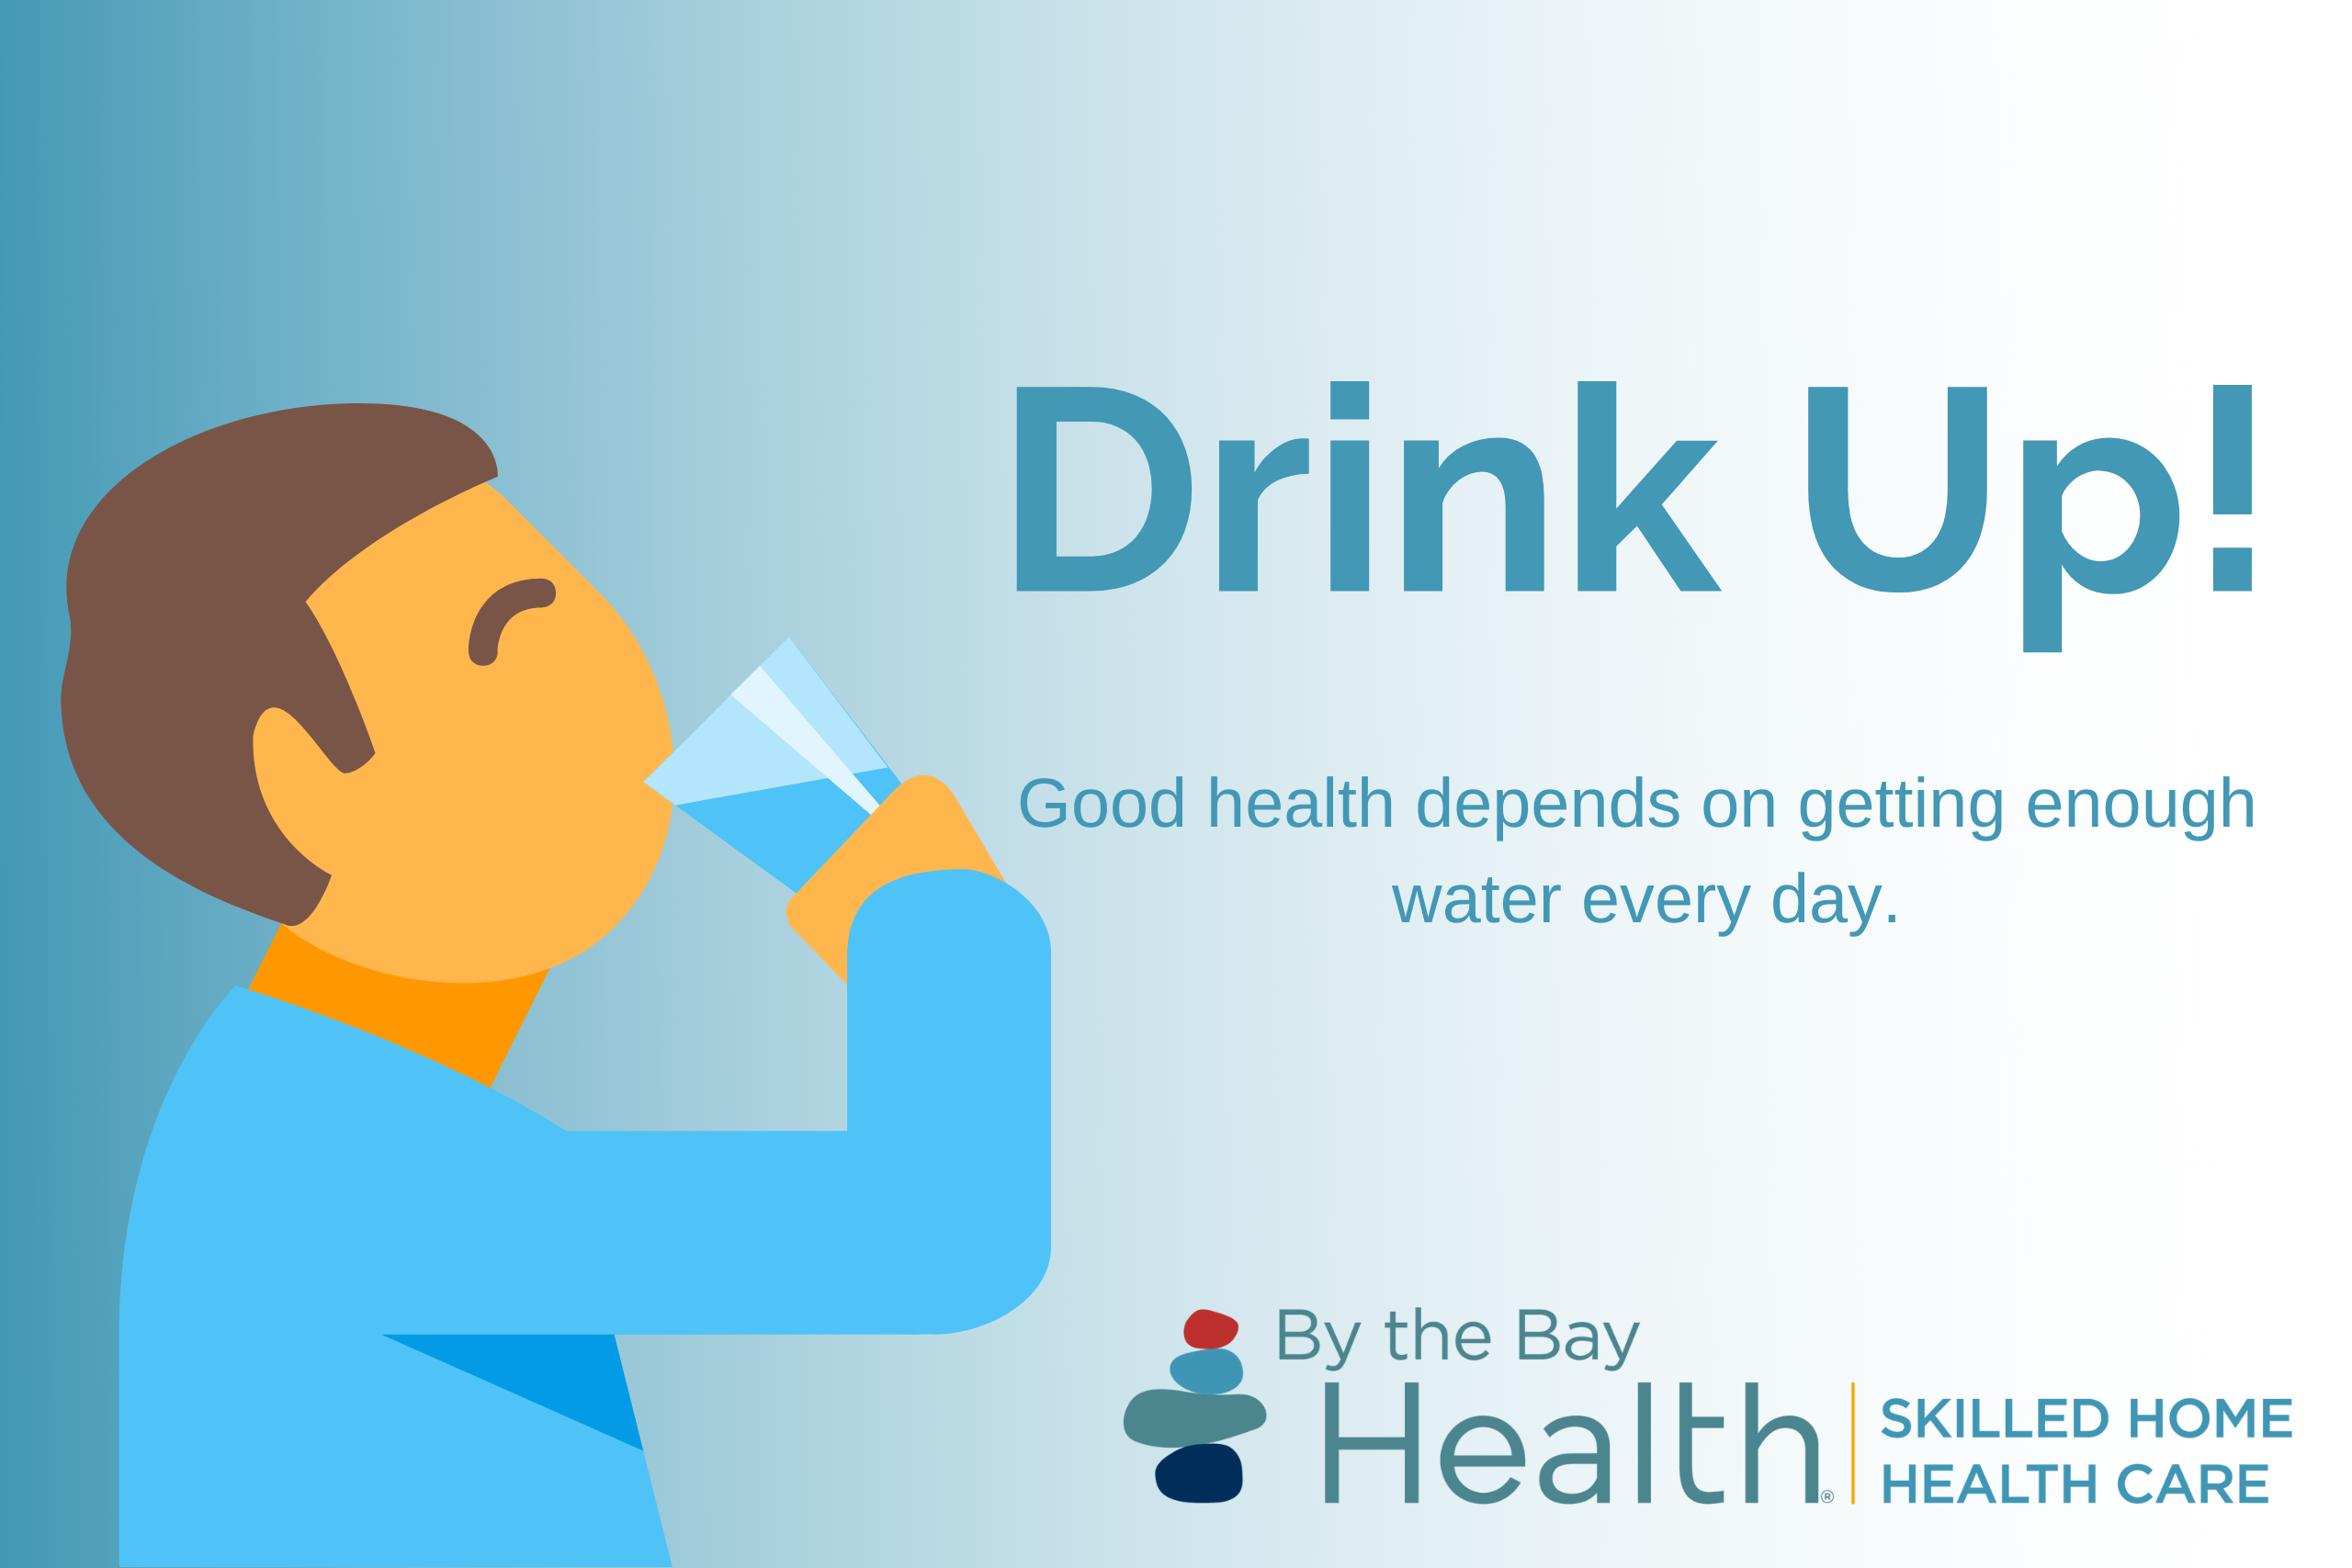 Stay hydrated, stay healthy